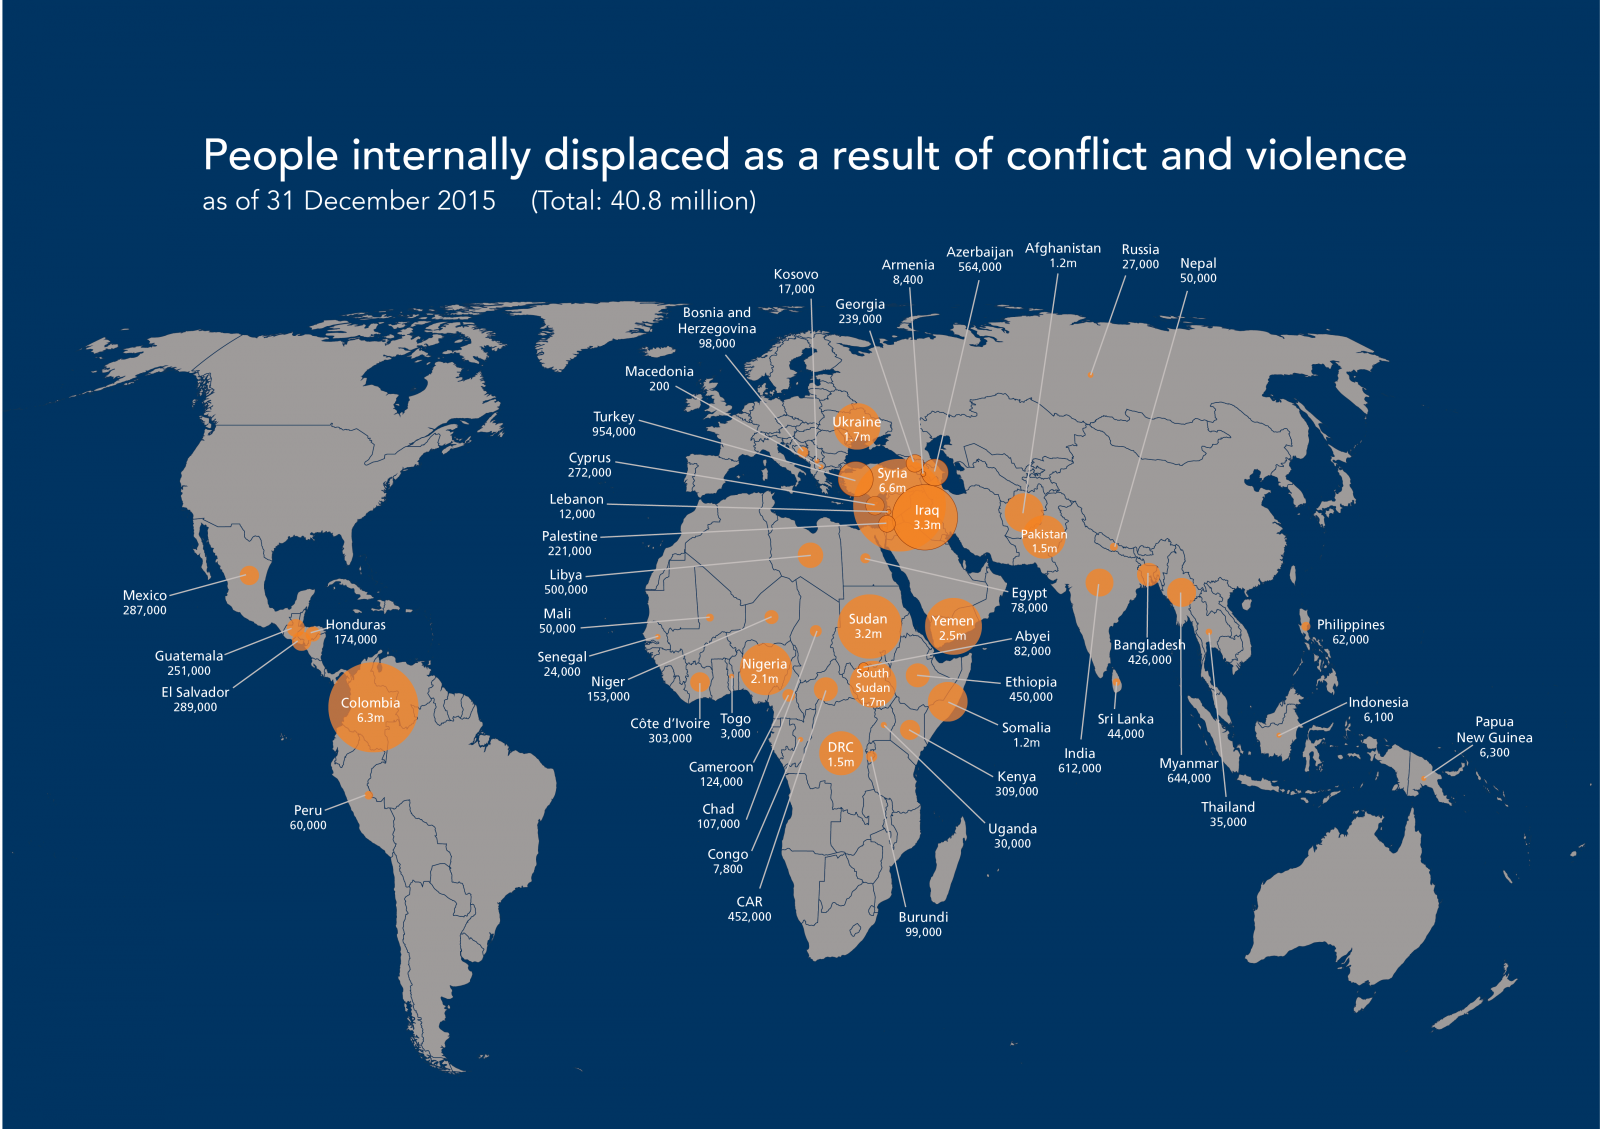 how many armed conflicts are currently going on in the world